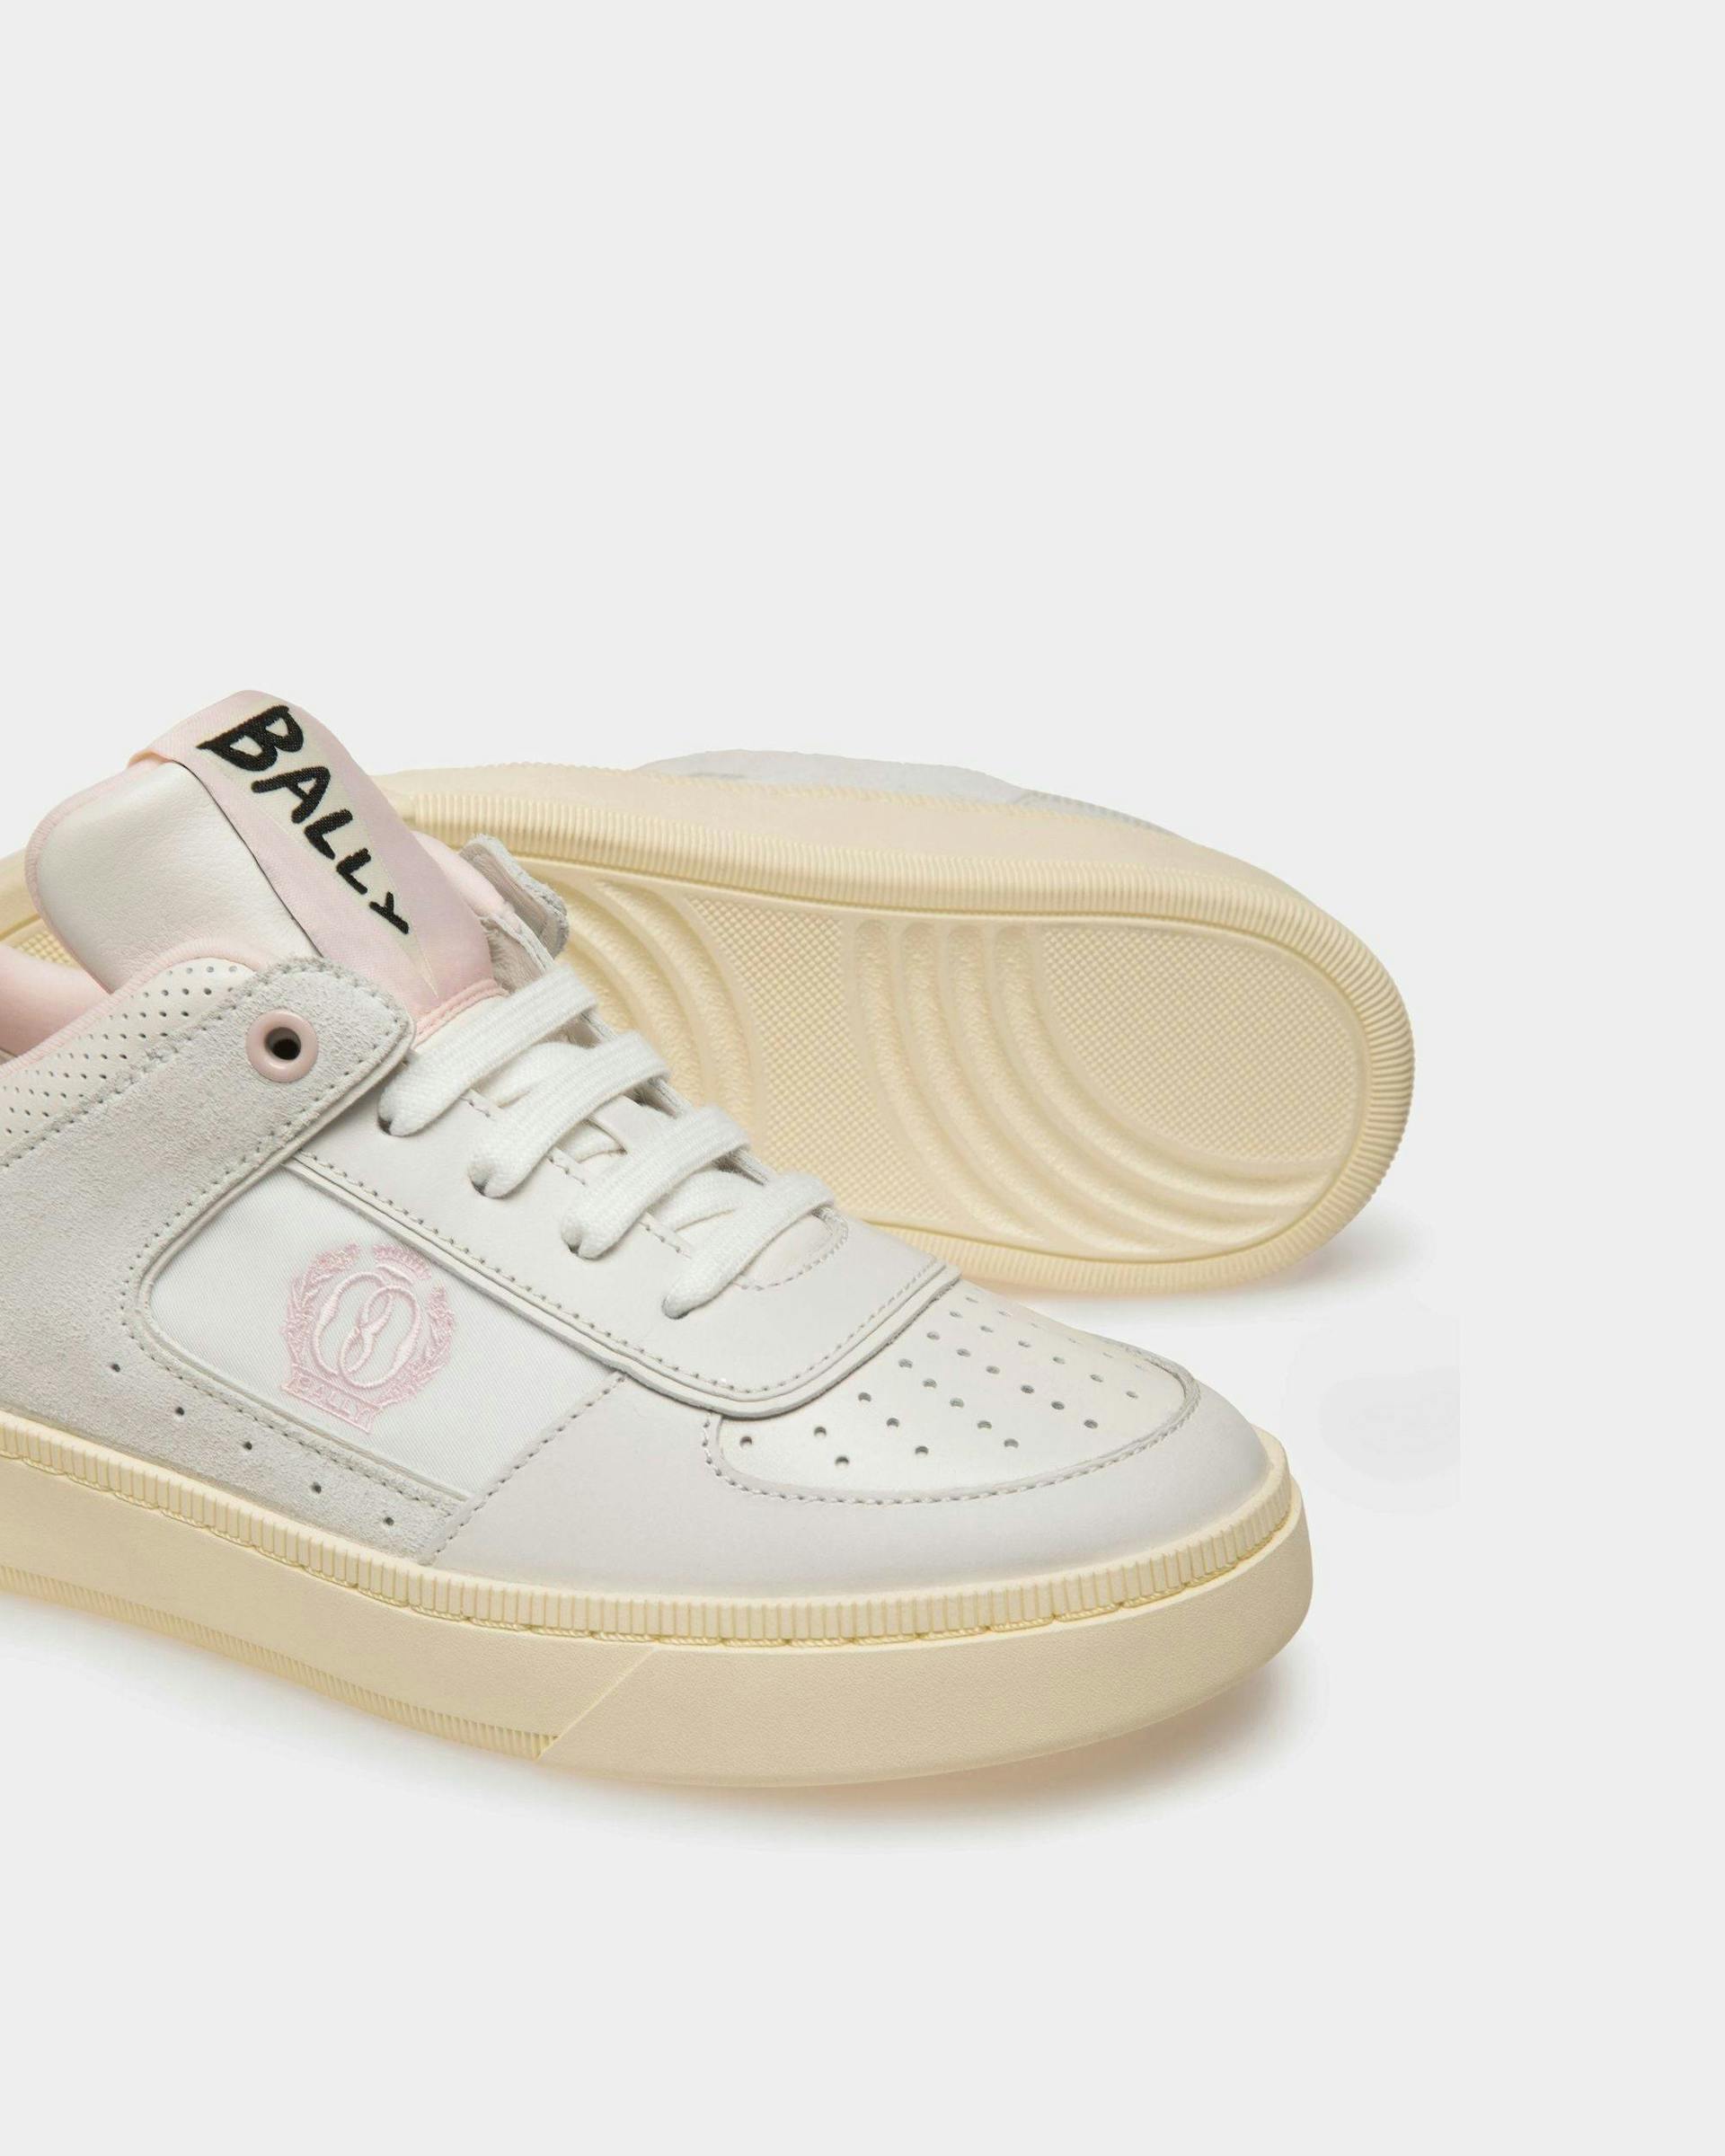 Raise Sneakers In White And Pink Leather - Women's - Bally - 04